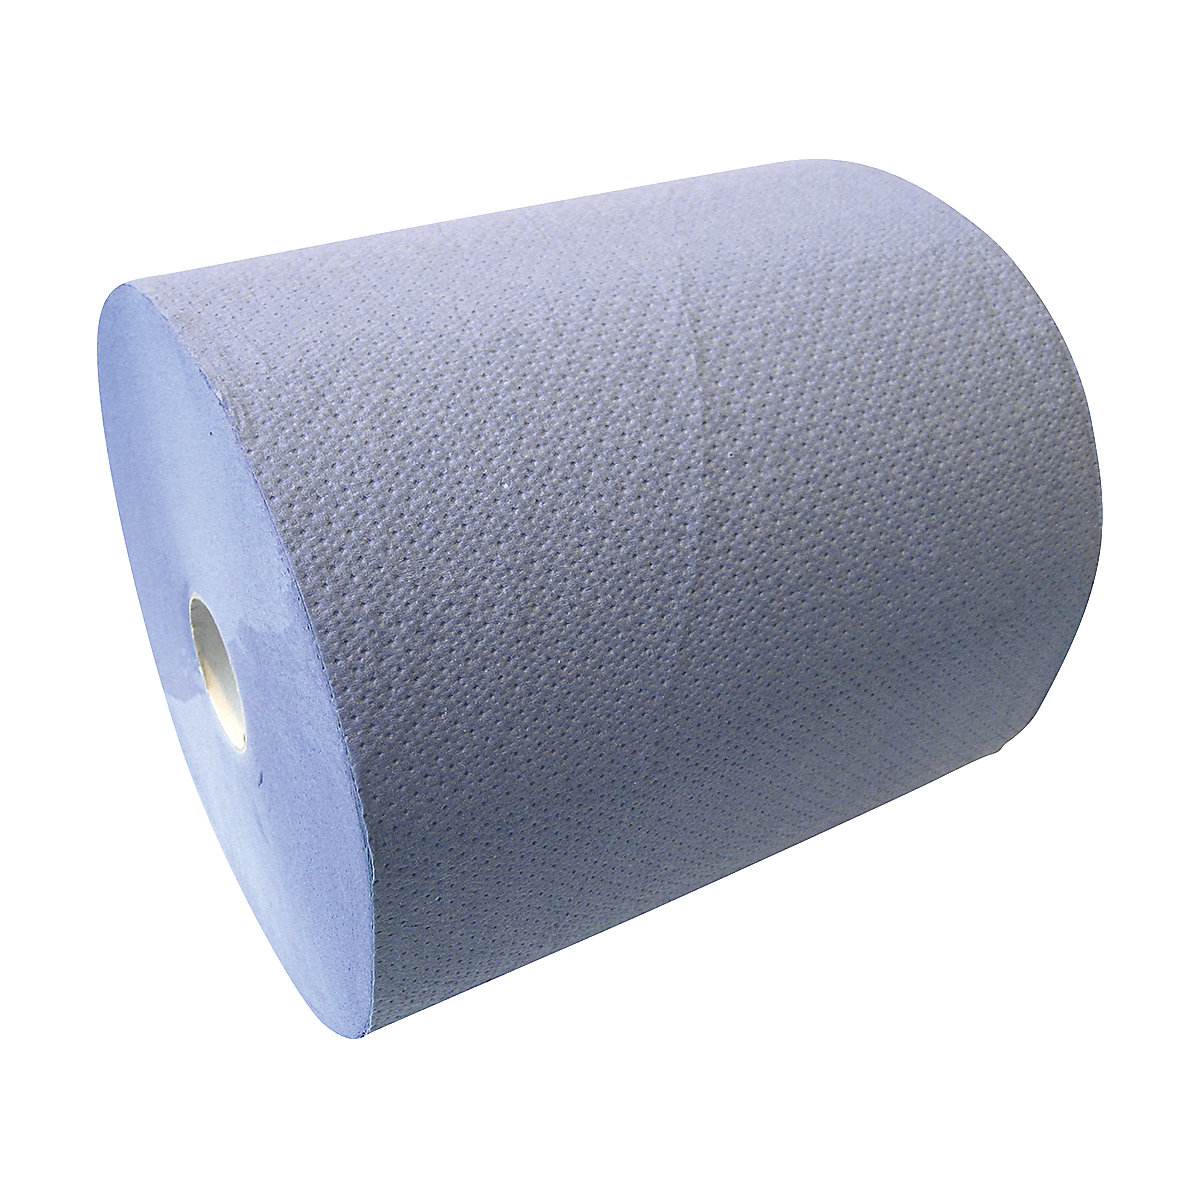 Roll of paper towels – CWS